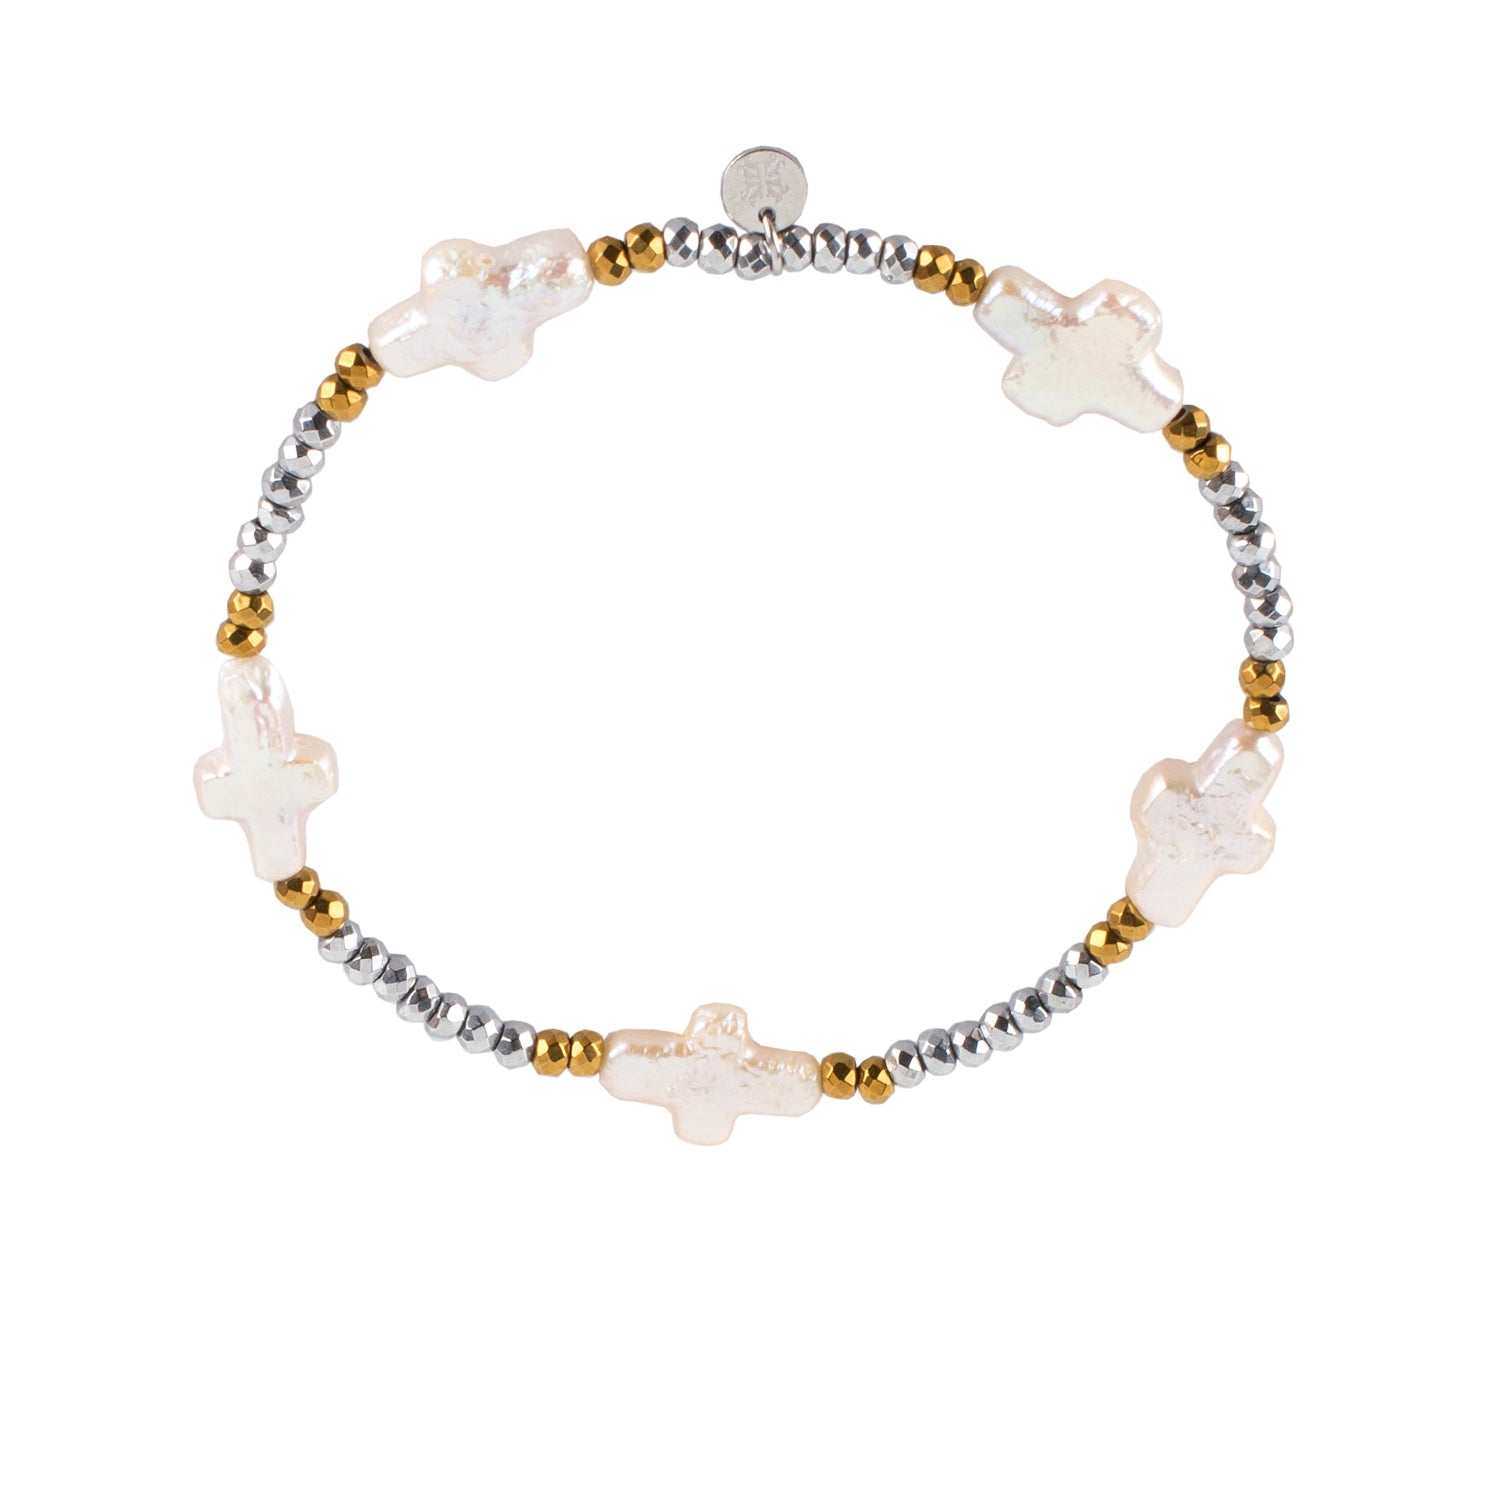 Marychelle Beaded Bracelet with Crosses in Mother of Pearl